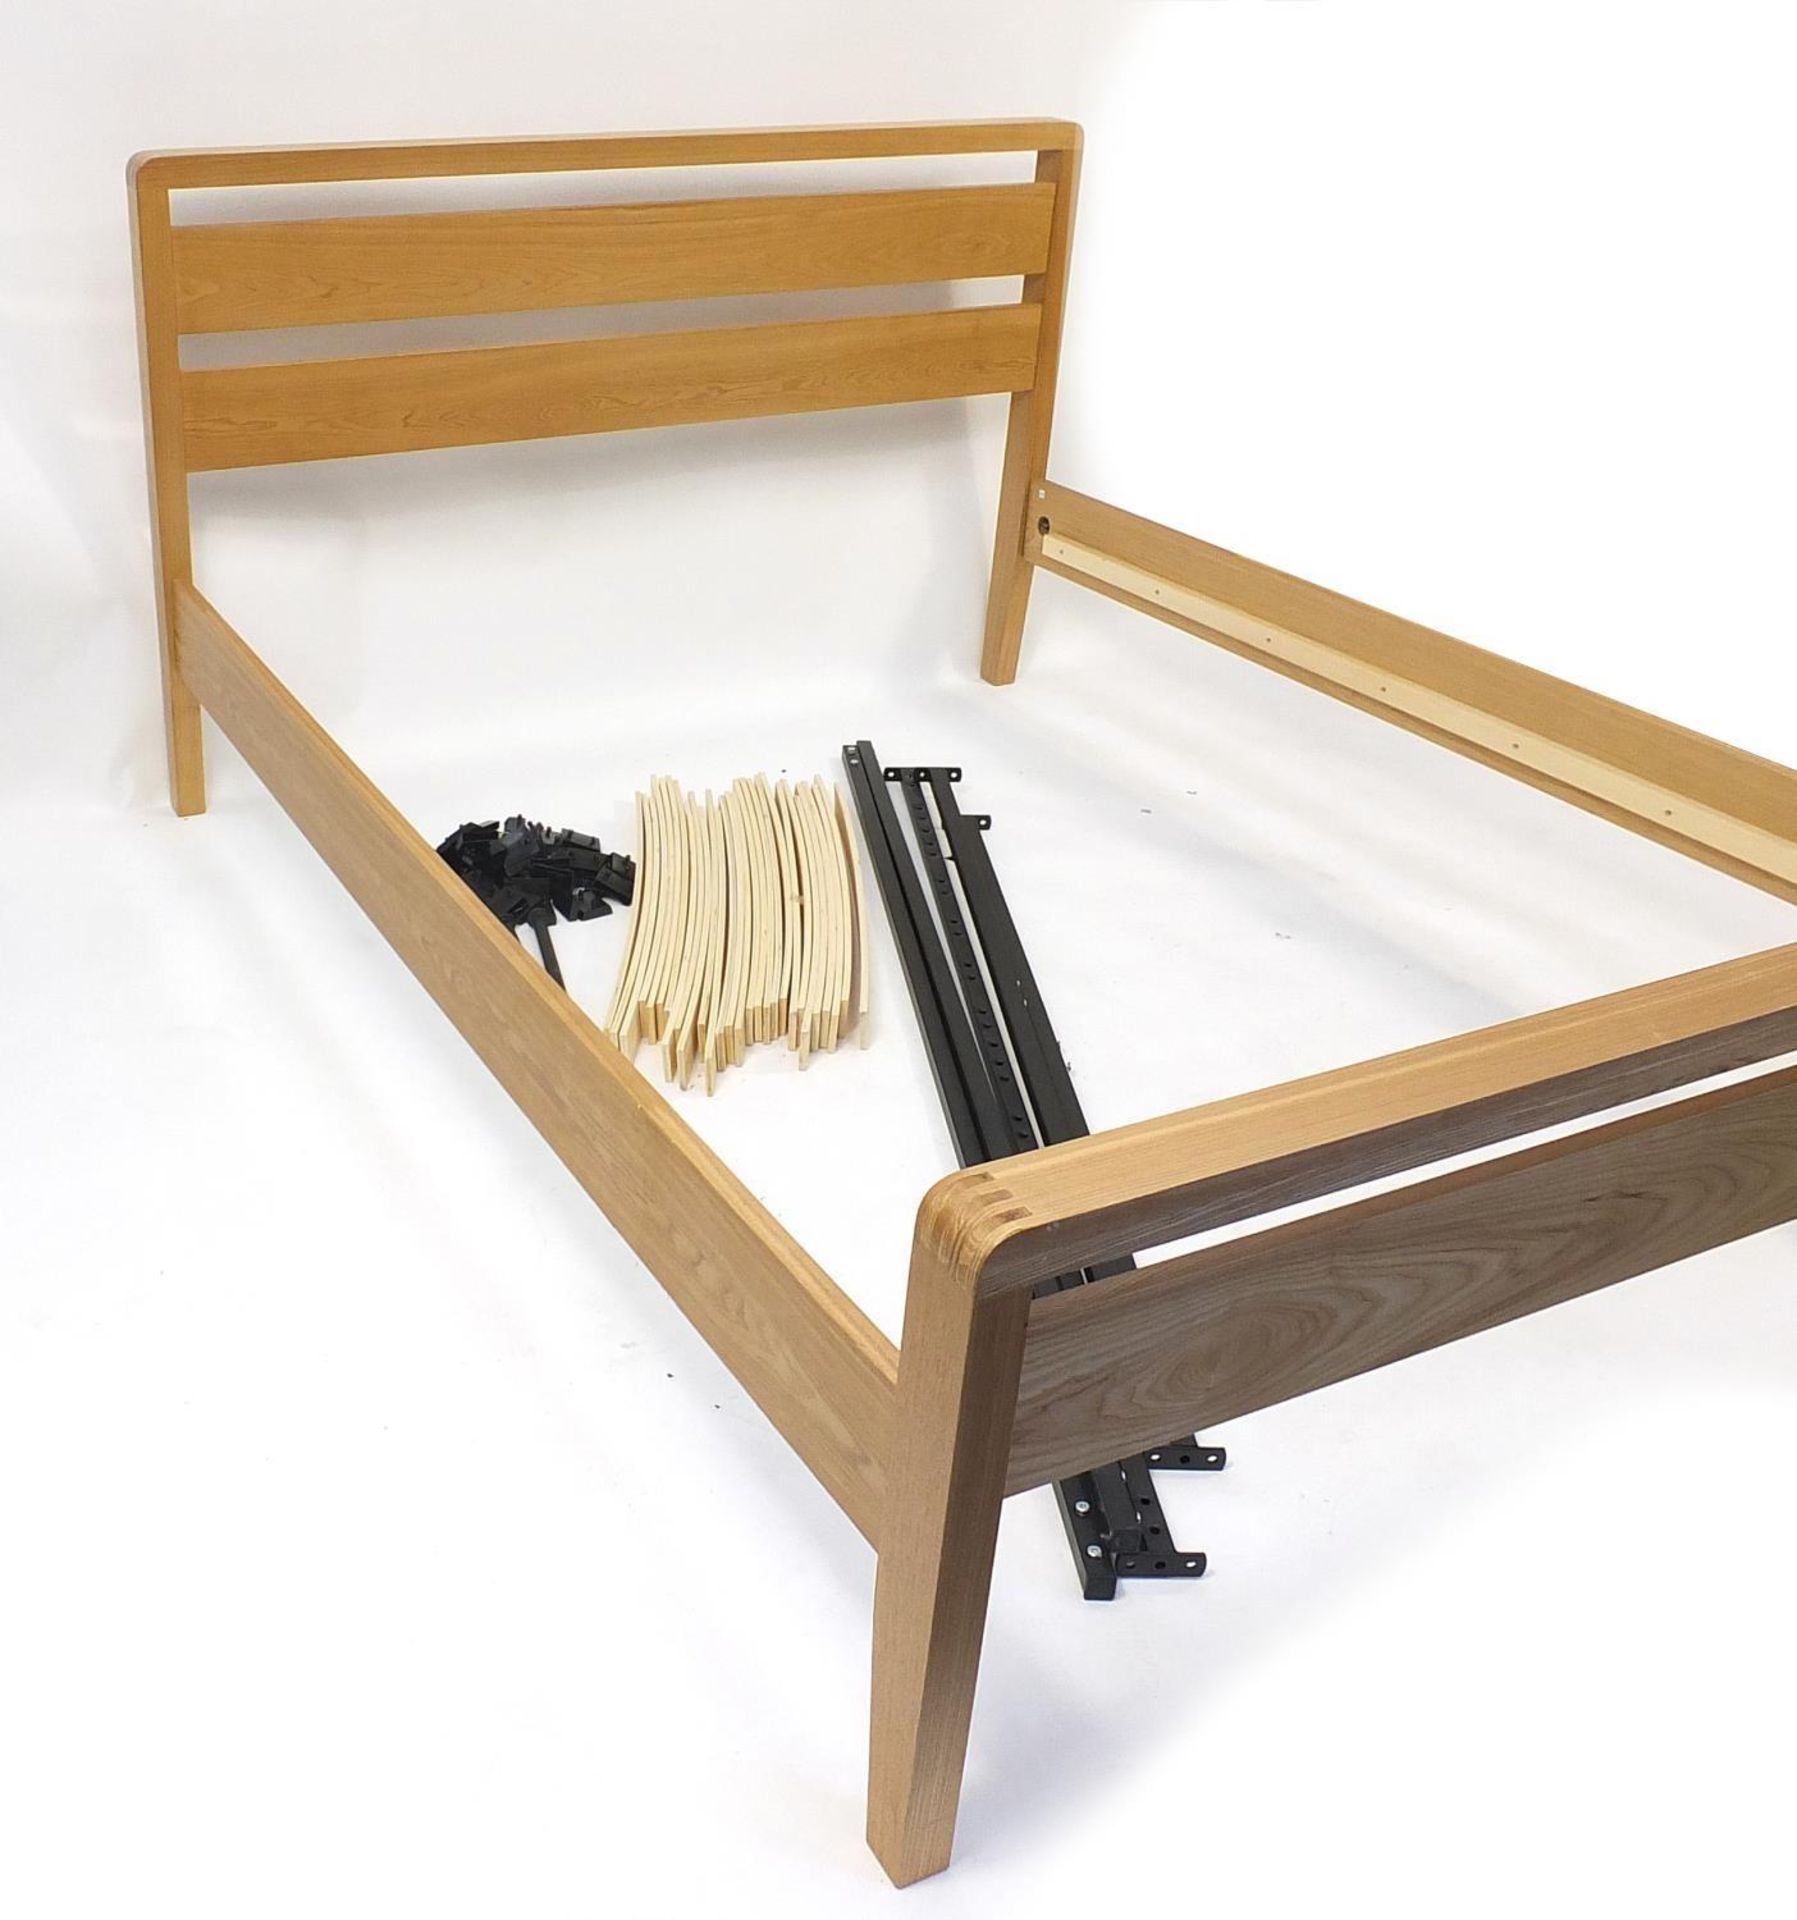 Contemporary light oak double 5ft bed frame - Image 3 of 3